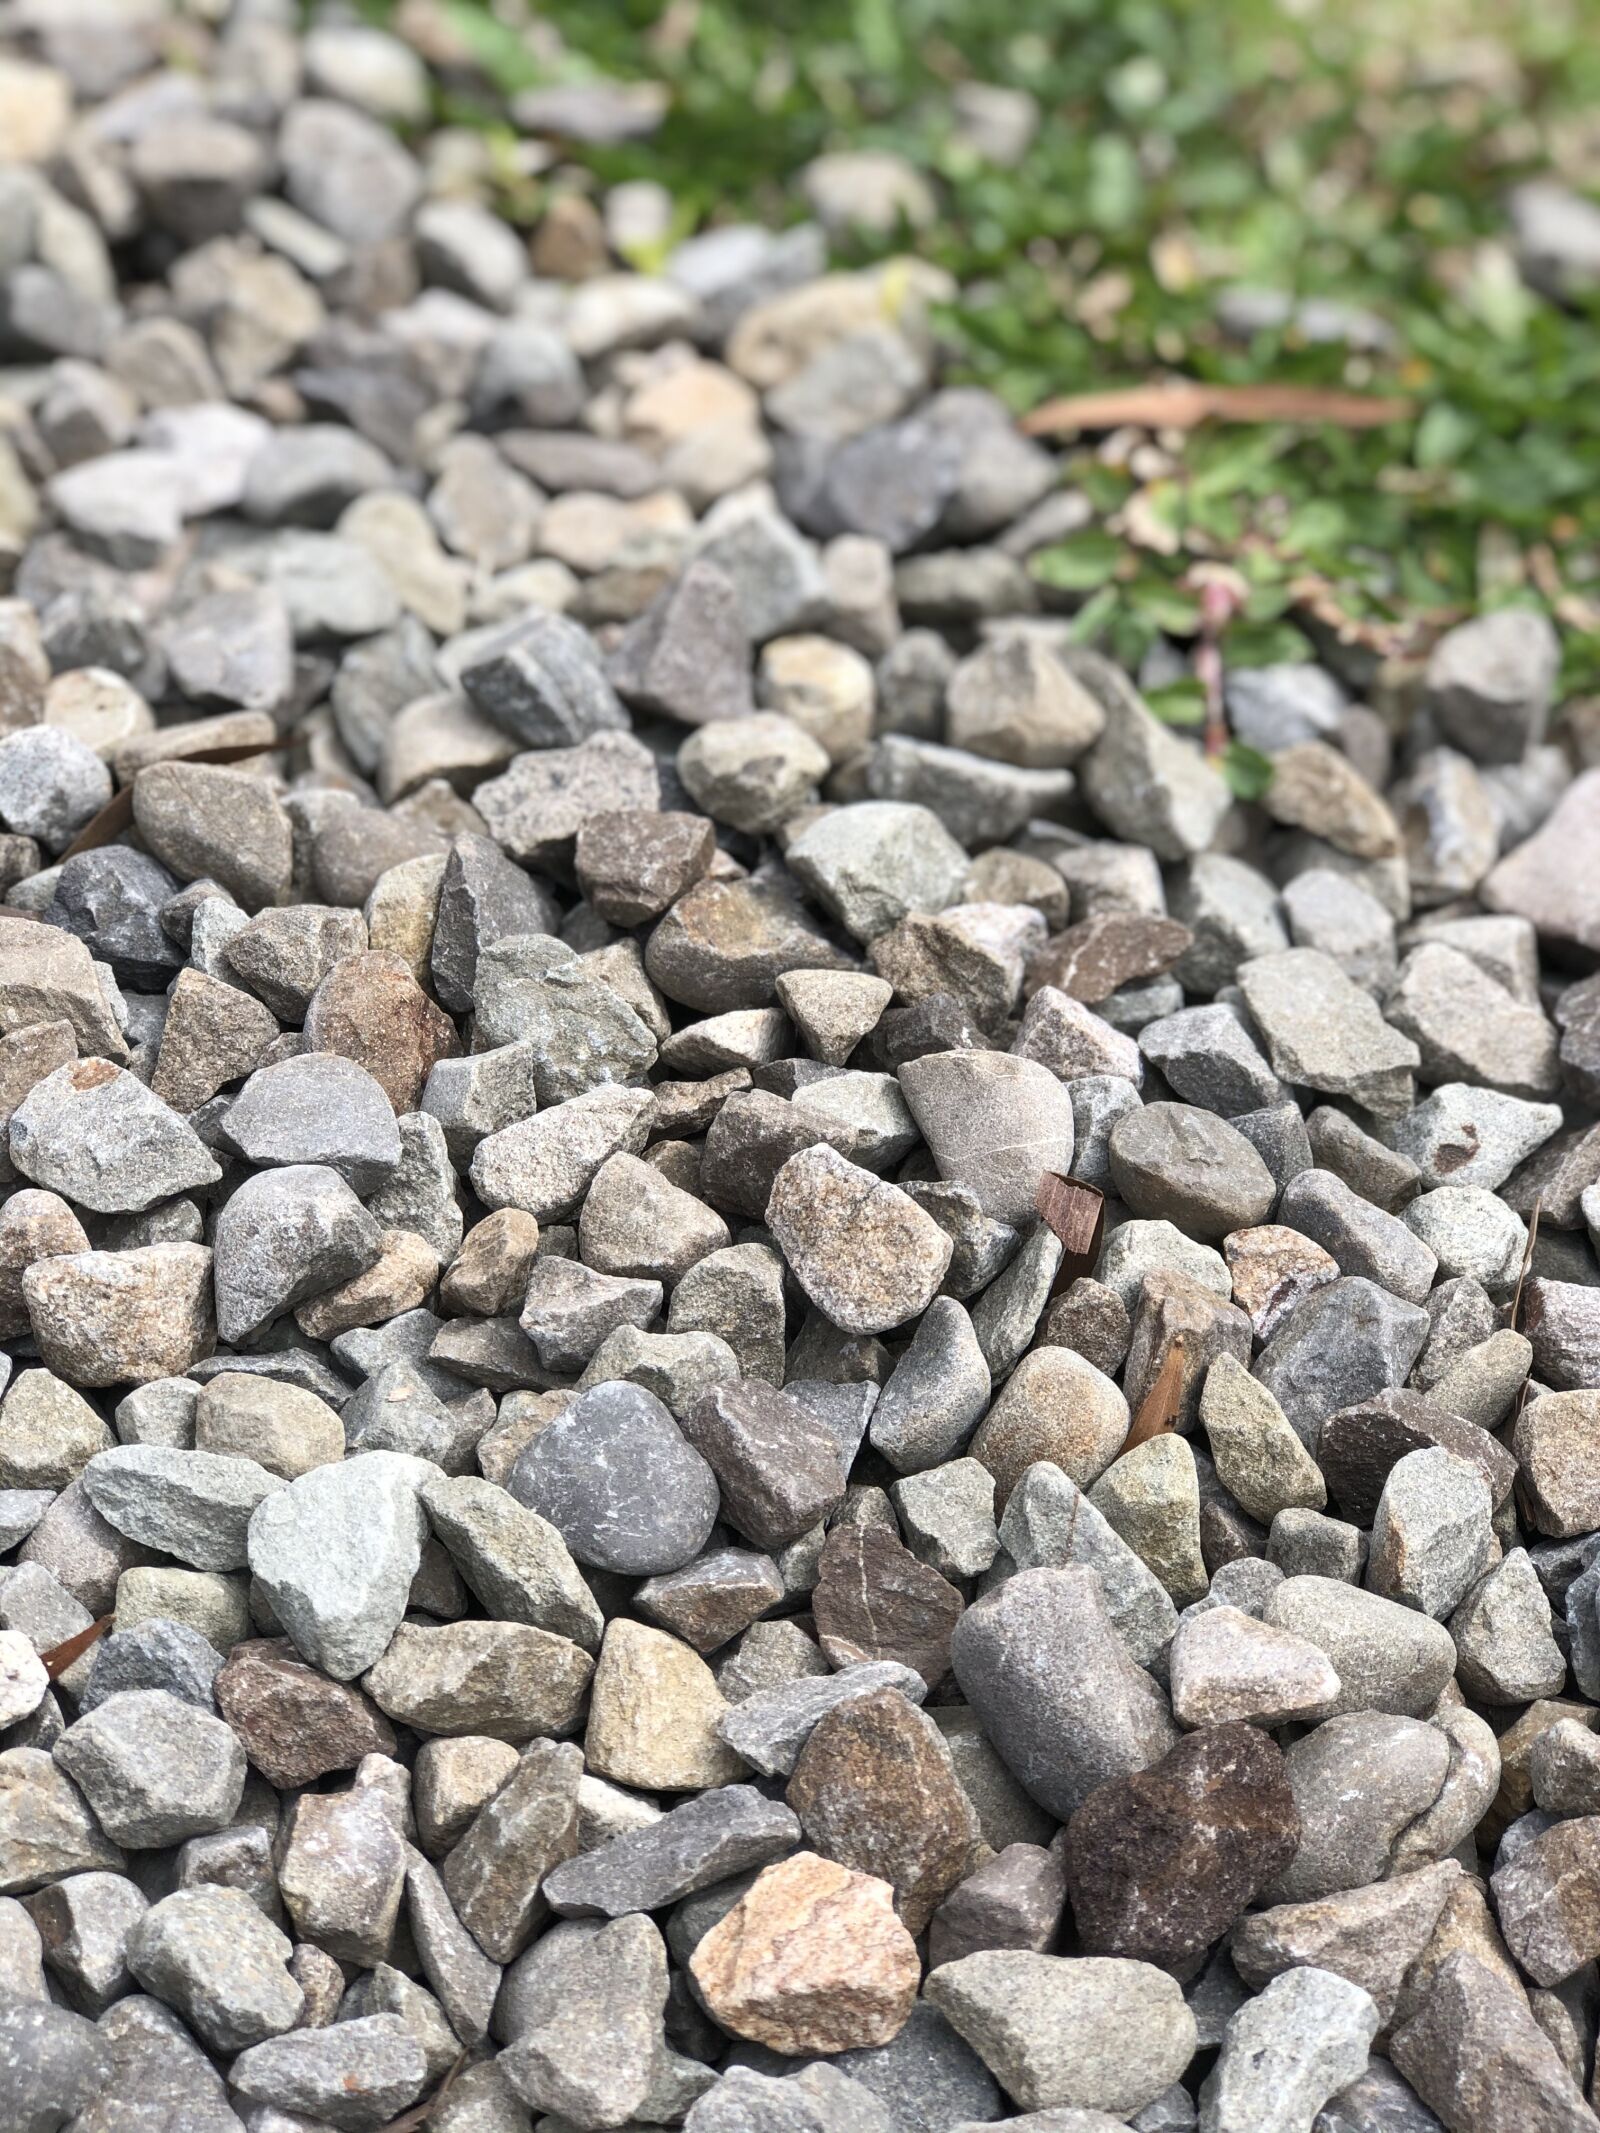 iPhone 8 Plus back dual camera 6.6mm f/2.8 sample photo. Pebbles, grass, nature photography